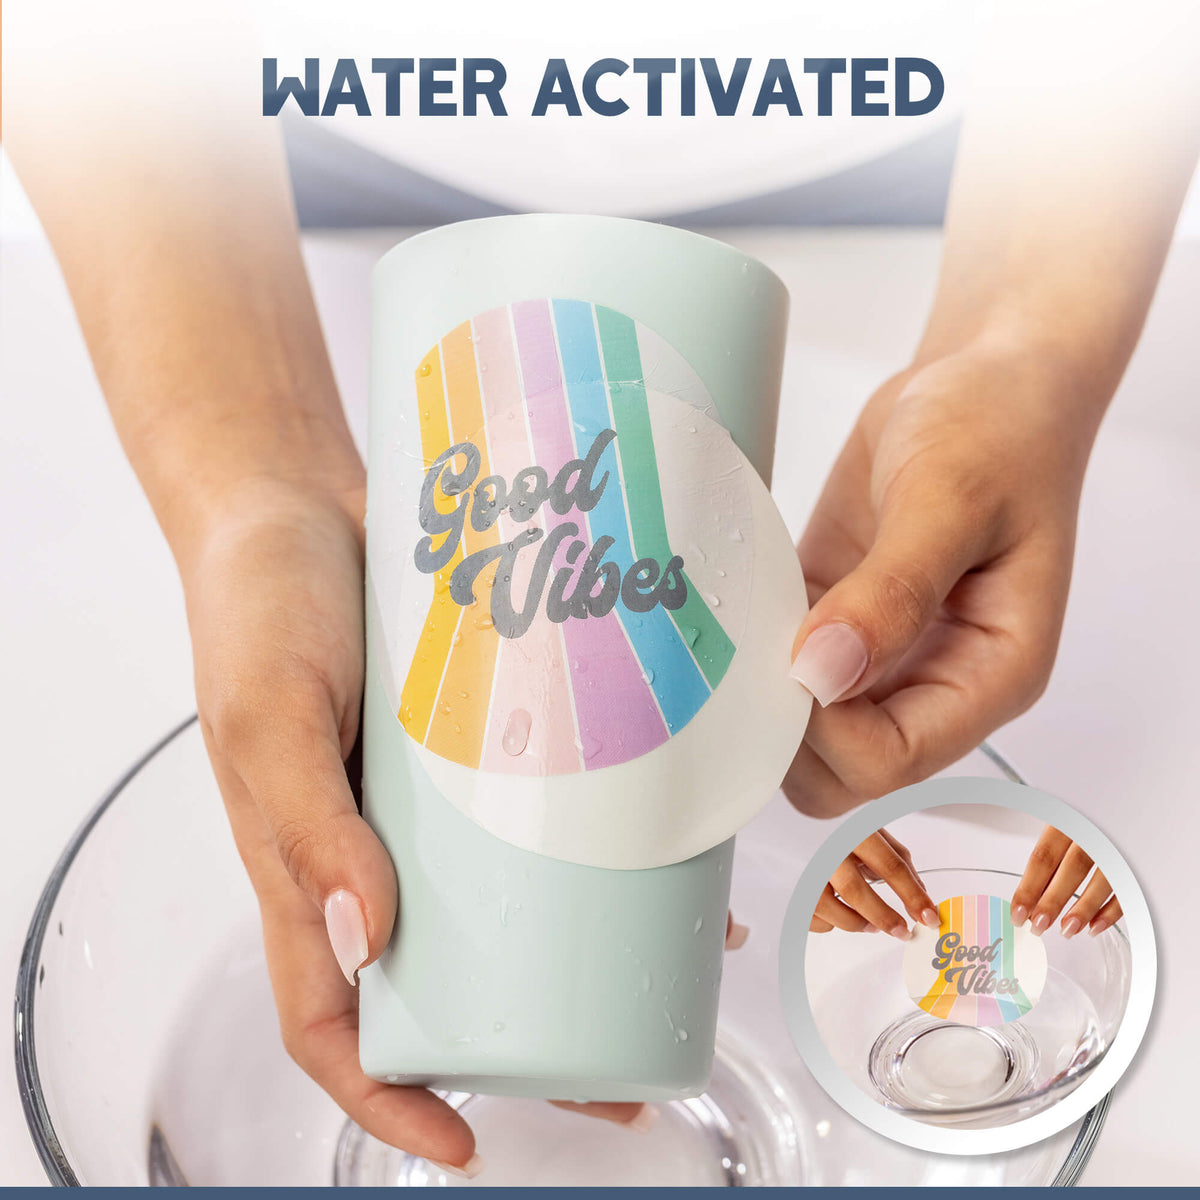 How to Apply Waterslide Decals to Tumblers 